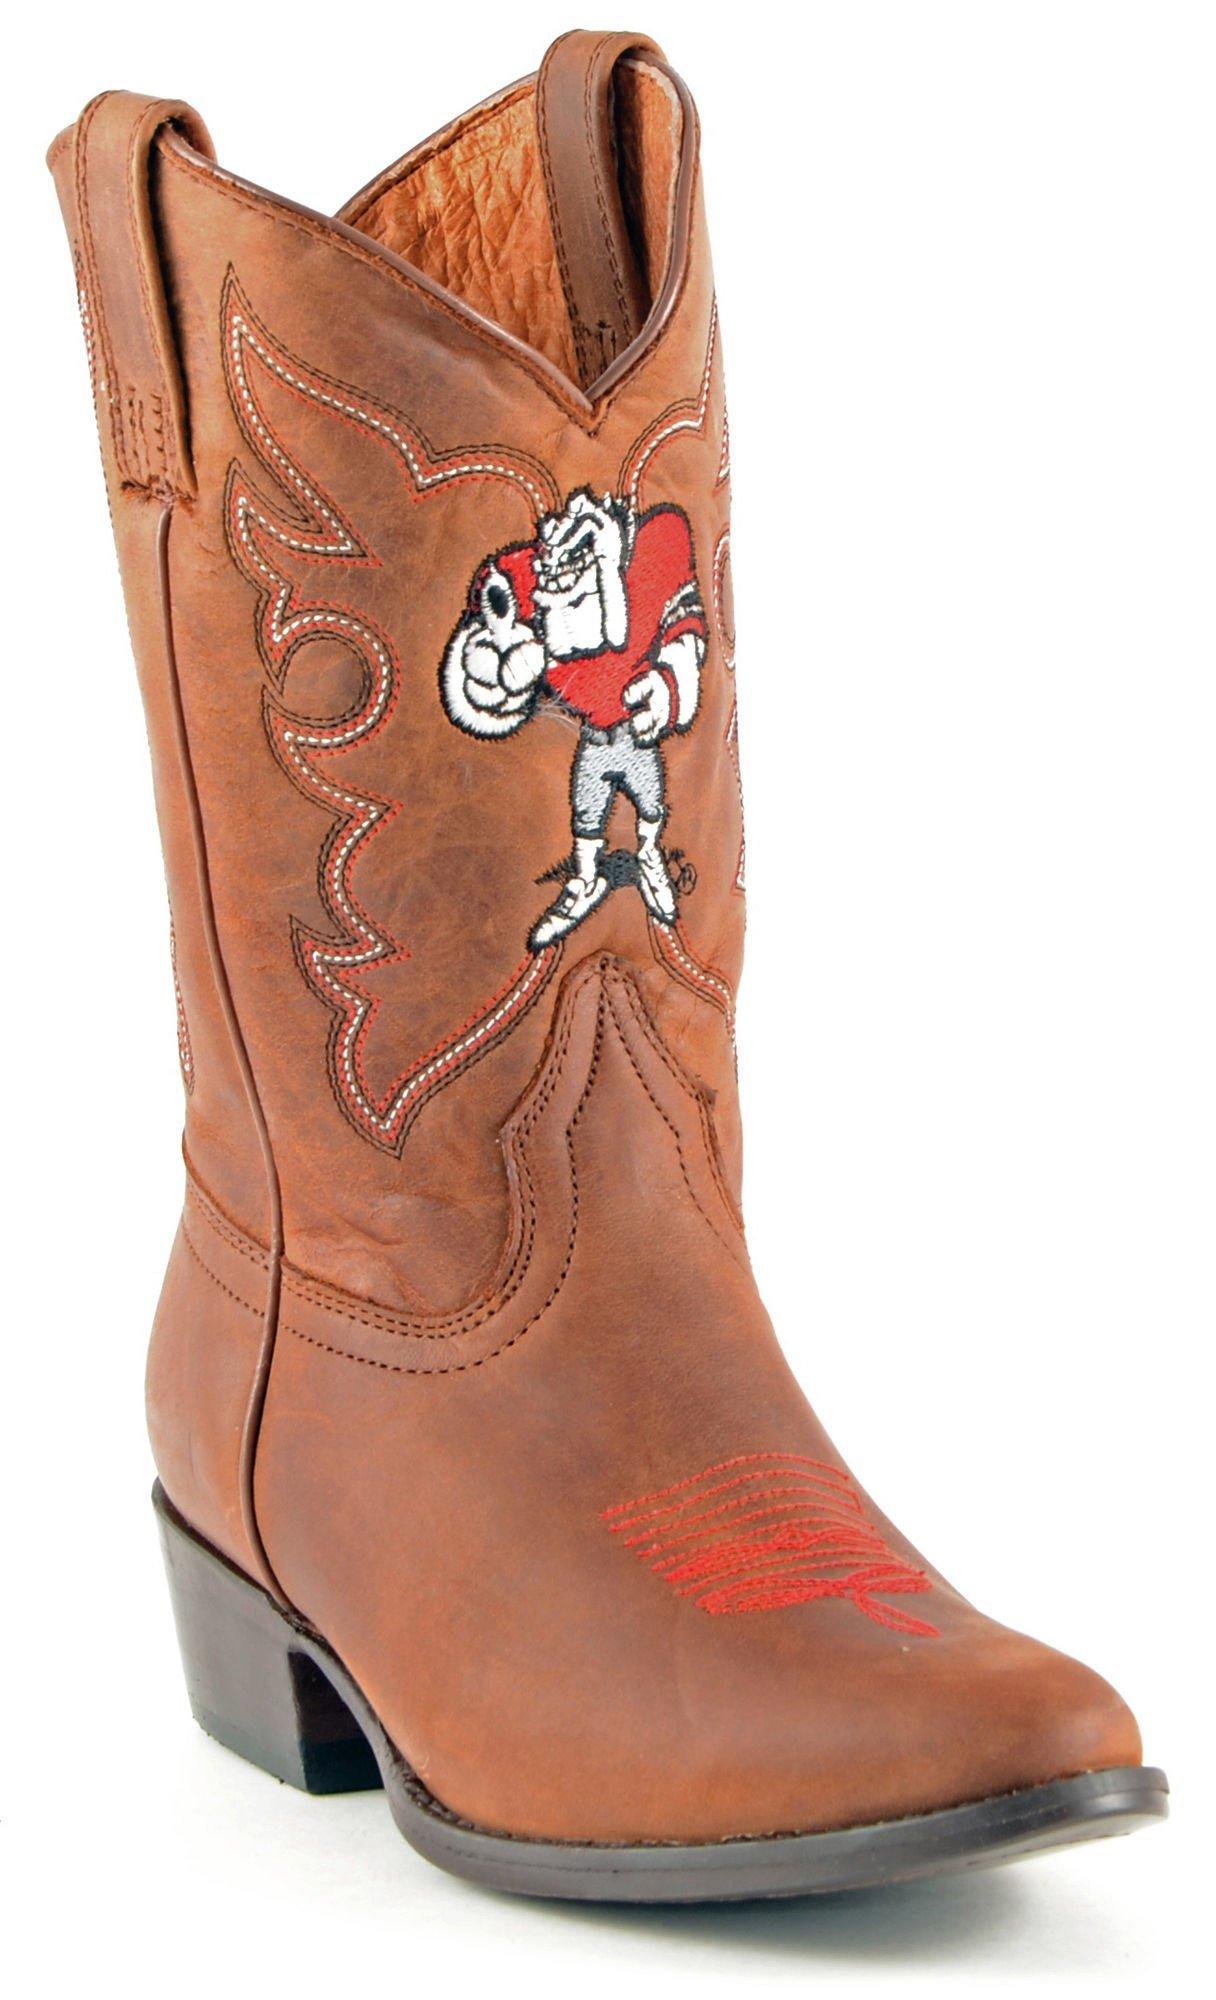 Boys Cowboy Boots by Gameday Boots